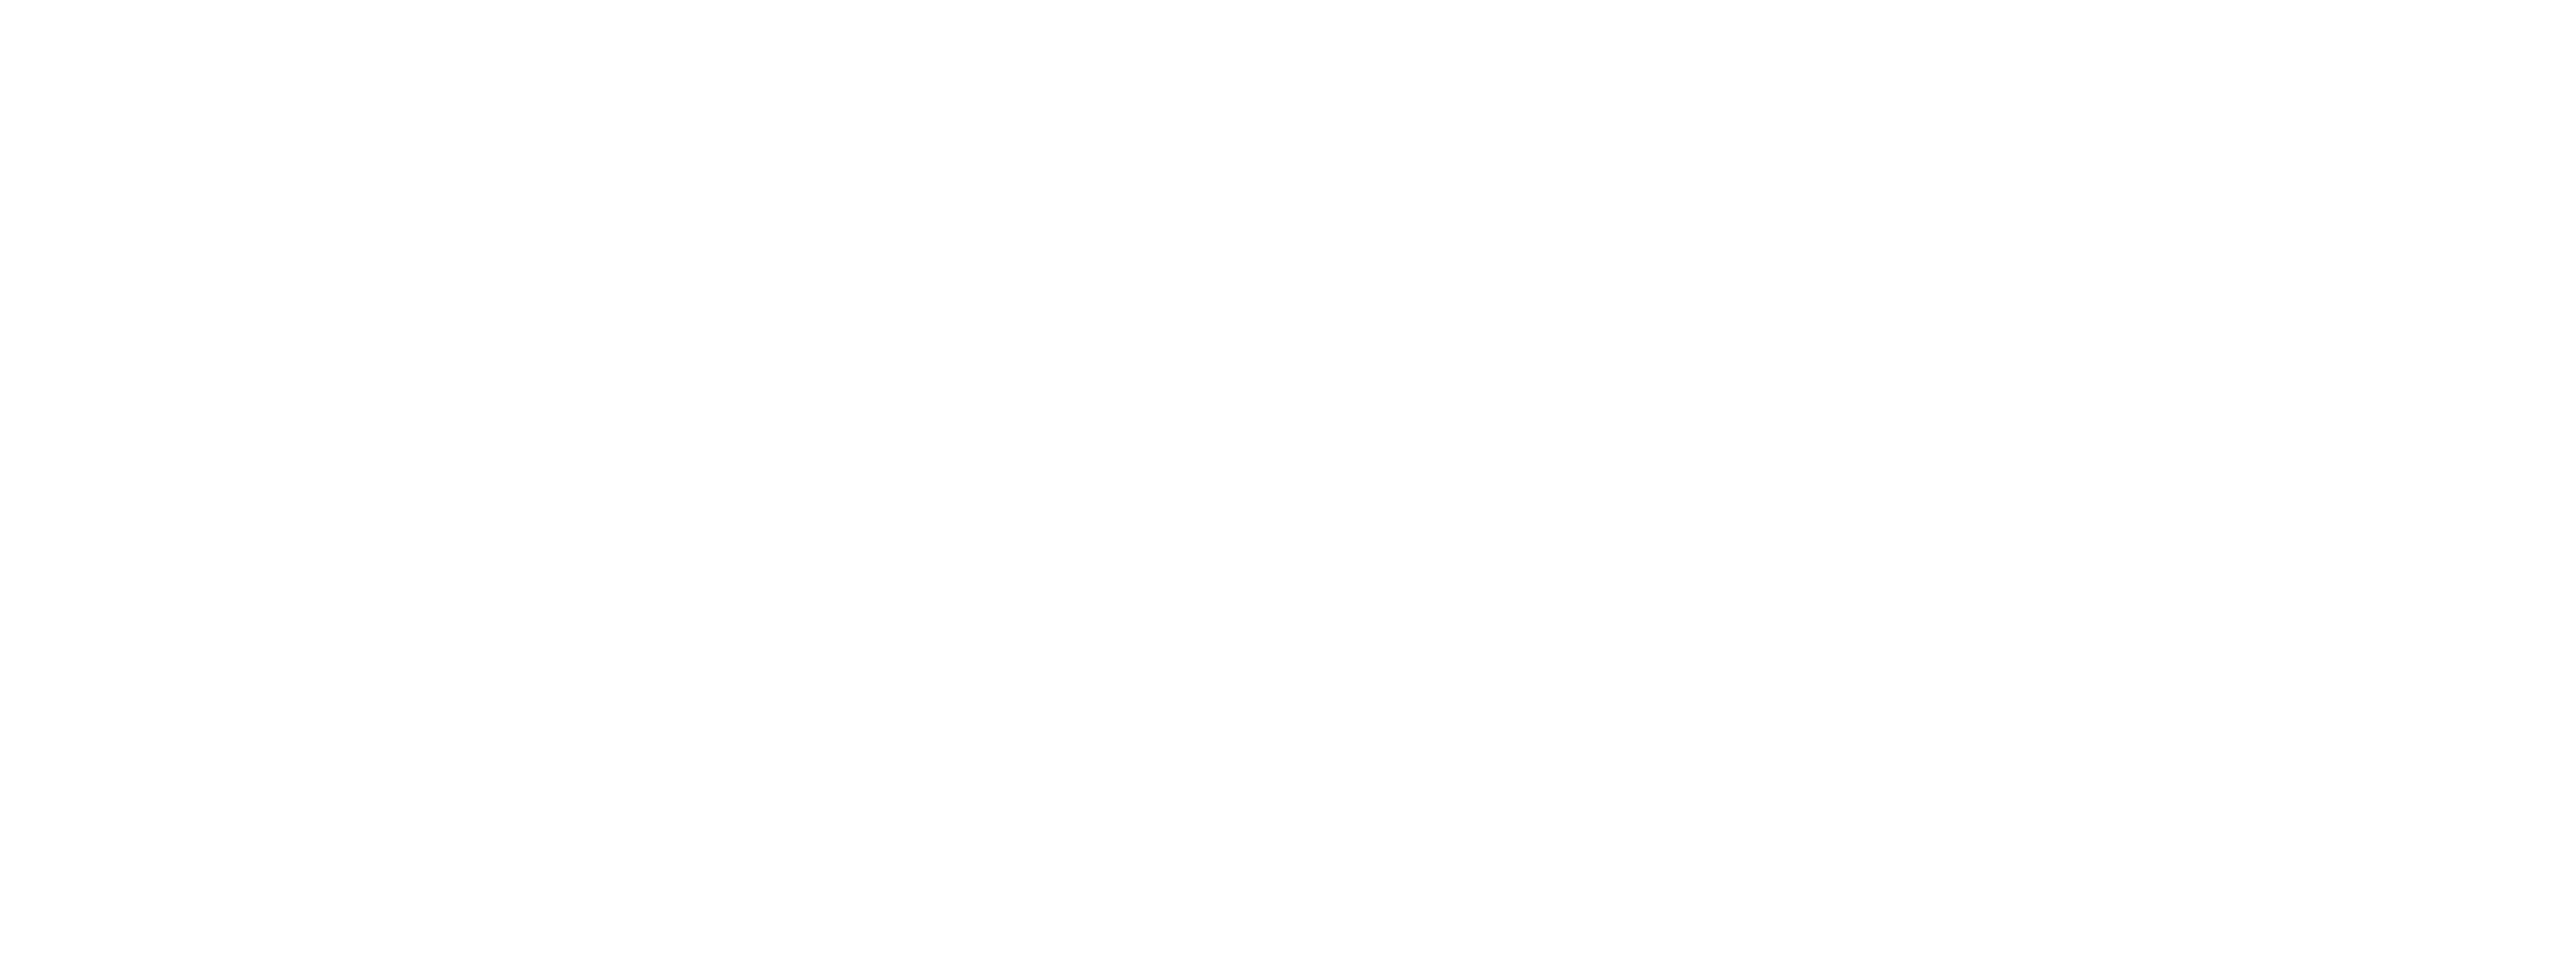 Love Tomorrow Conference